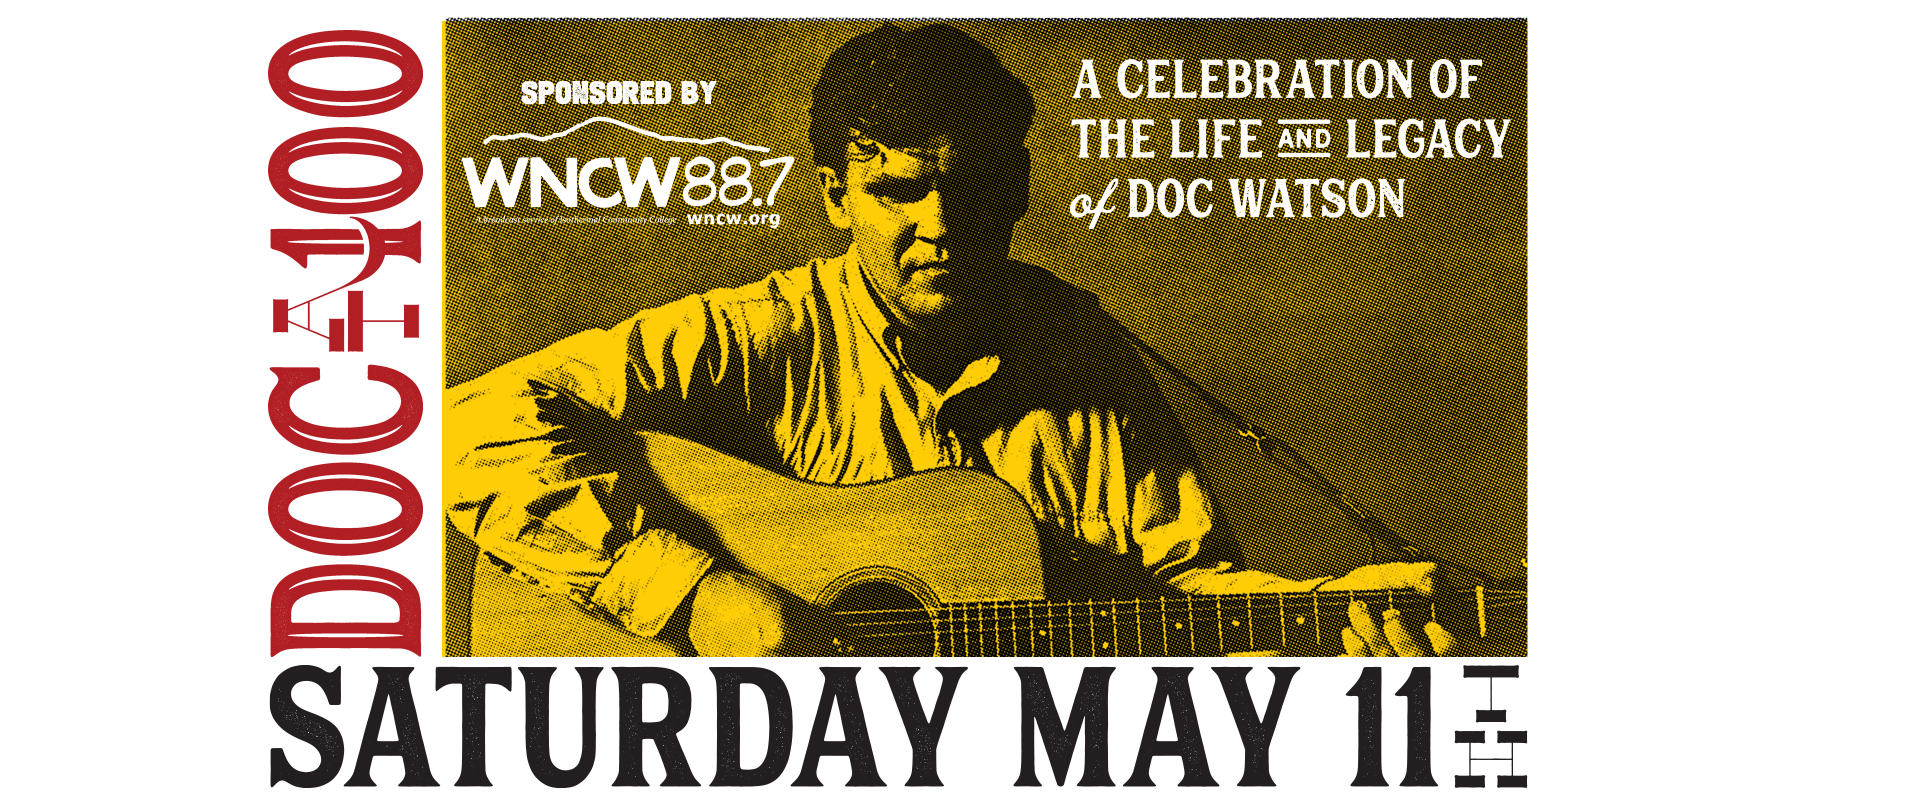 Doc at 100 event poster, live music at Fretwell sponsored by WNCW